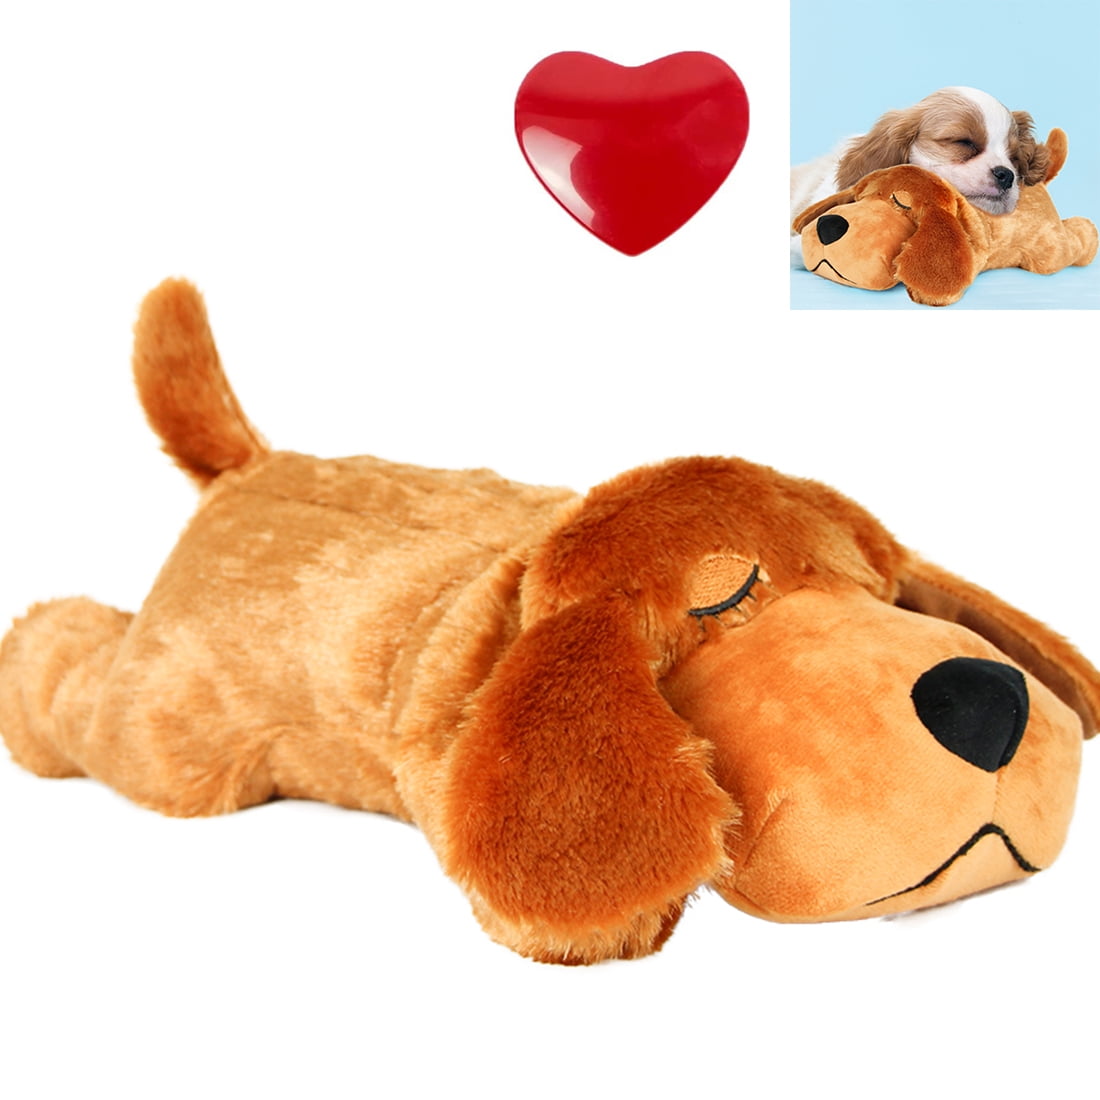 SmartPetLove Original Snuggle Puppy Heartbeat Stuffed Toy for Dogs. Pet  Anxiety Relief and Calming Aid, Comfort Toy for Behavioral Training in  Brown.